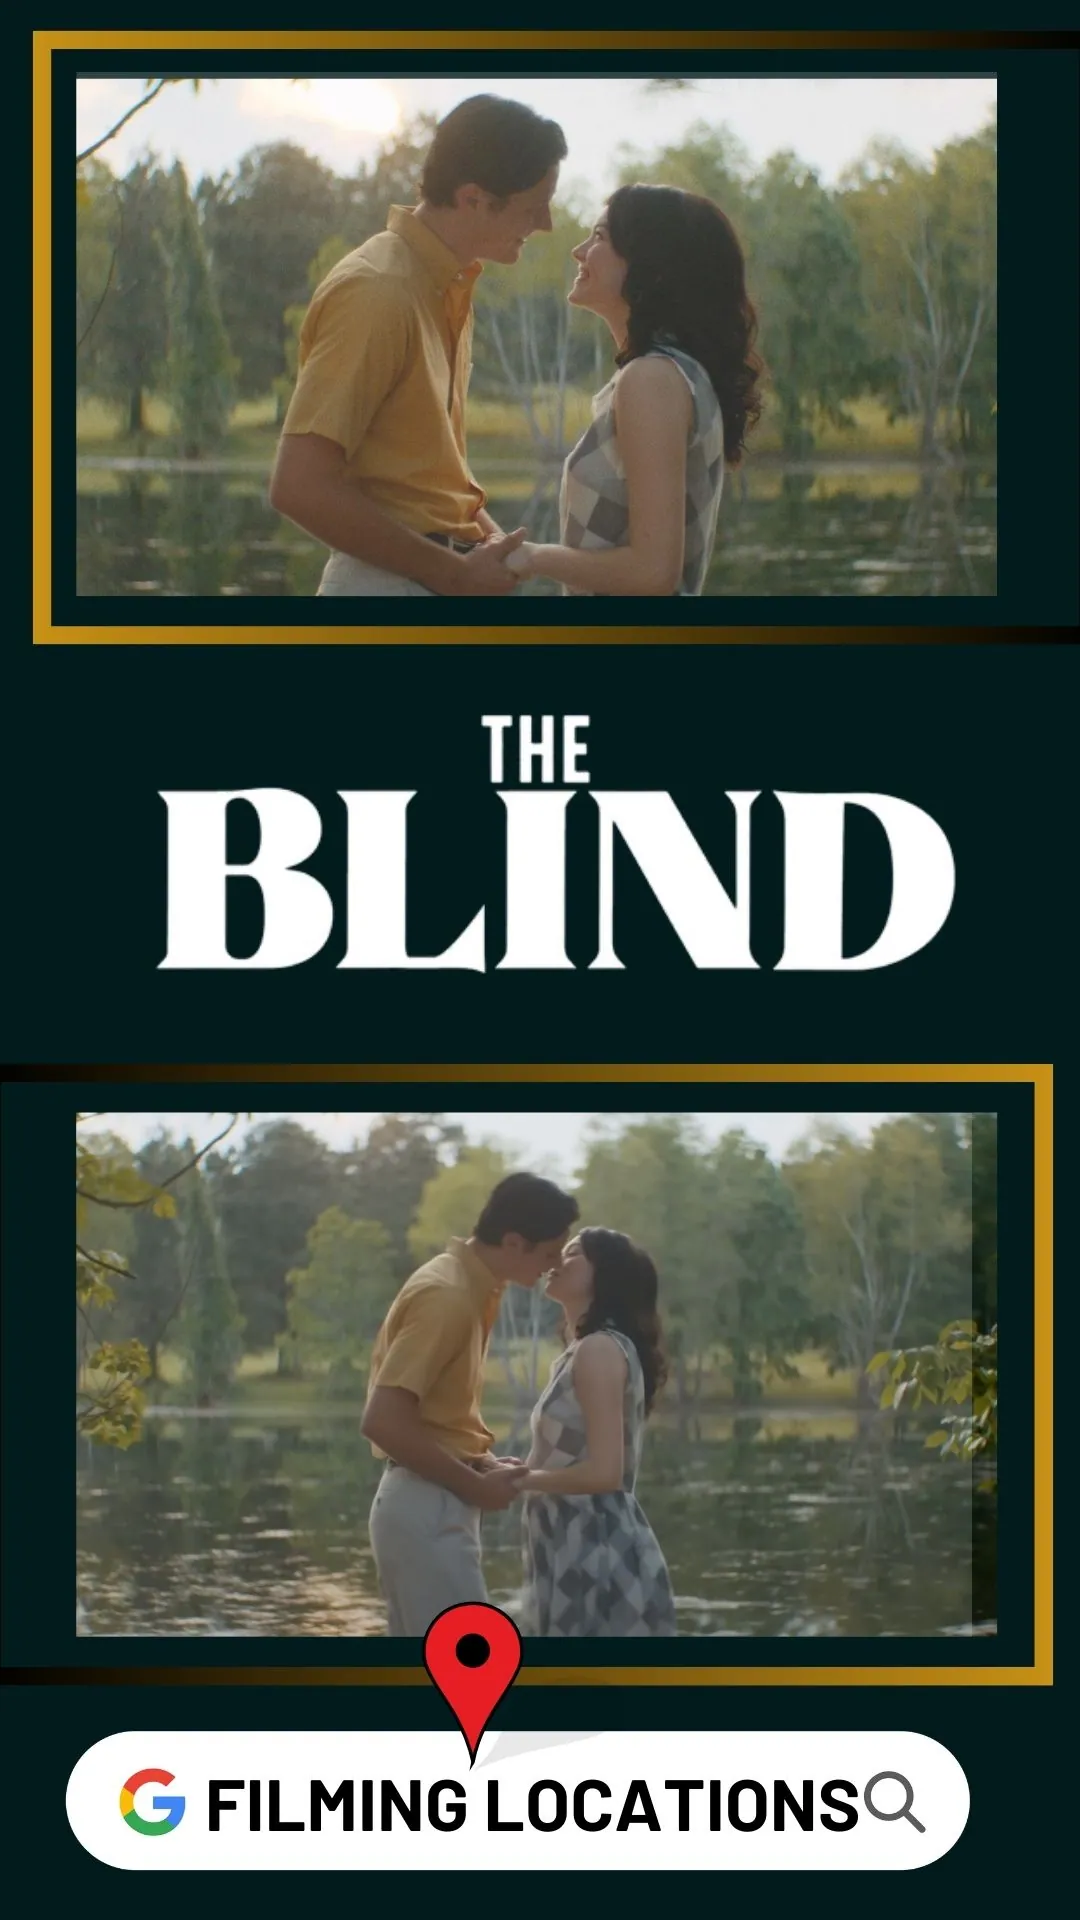 The Blind Filming Locations